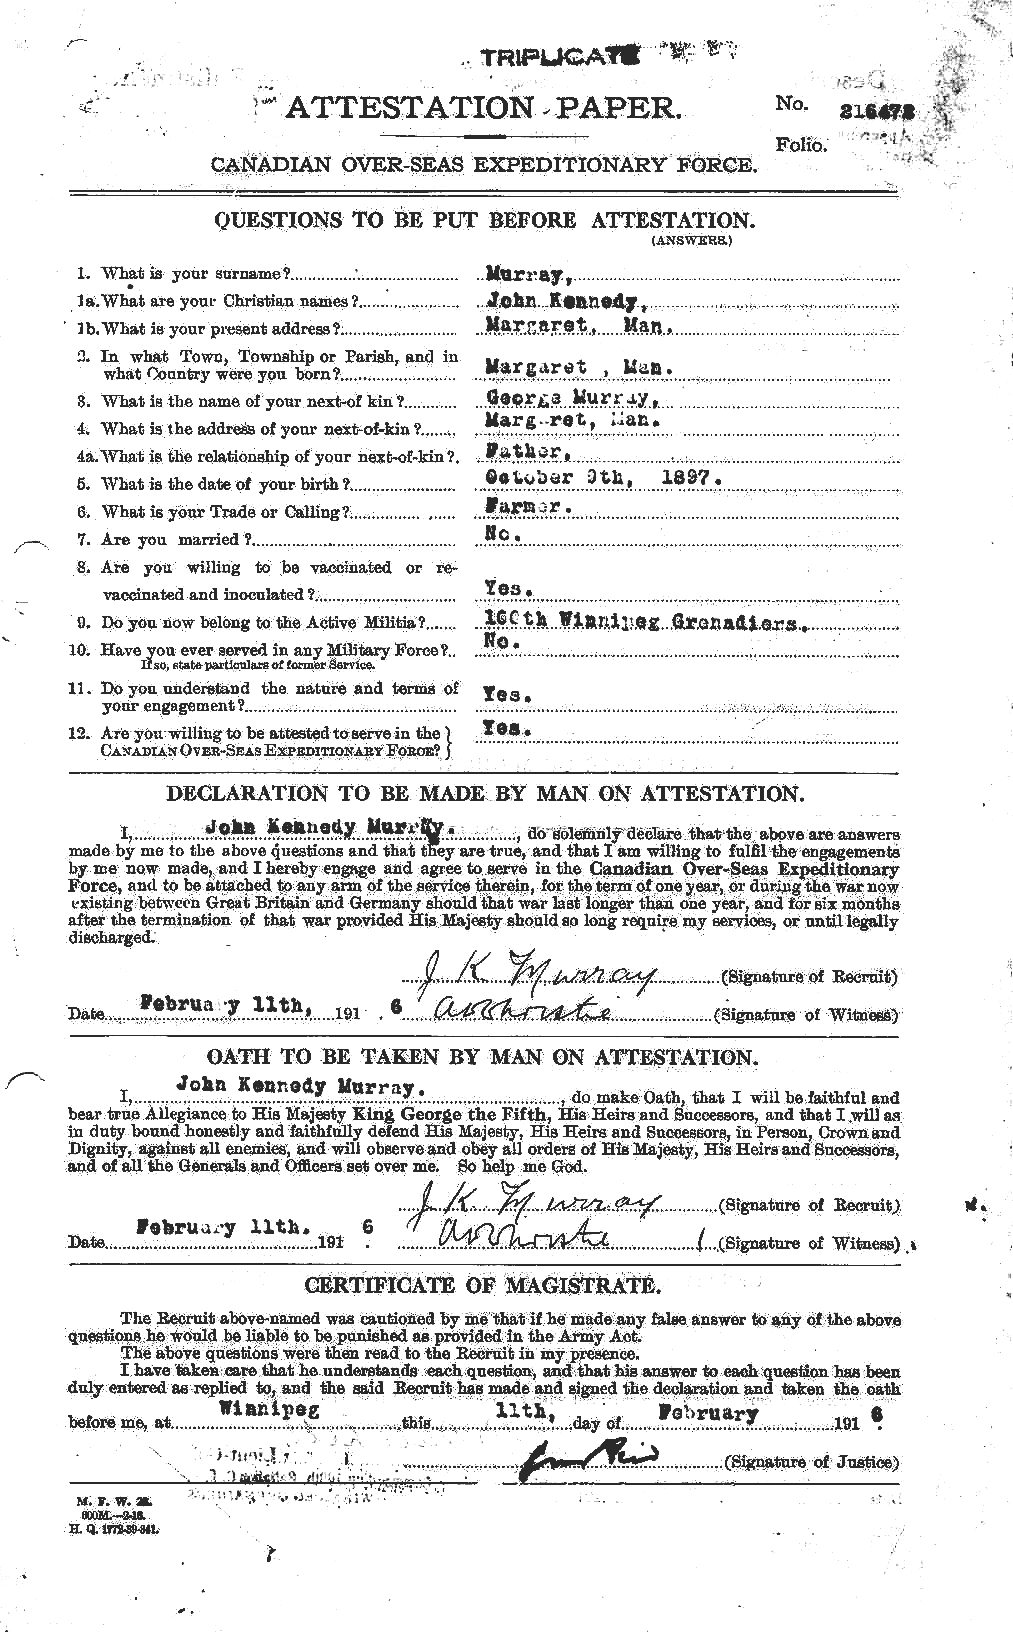 Personnel Records of the First World War - CEF 518608a